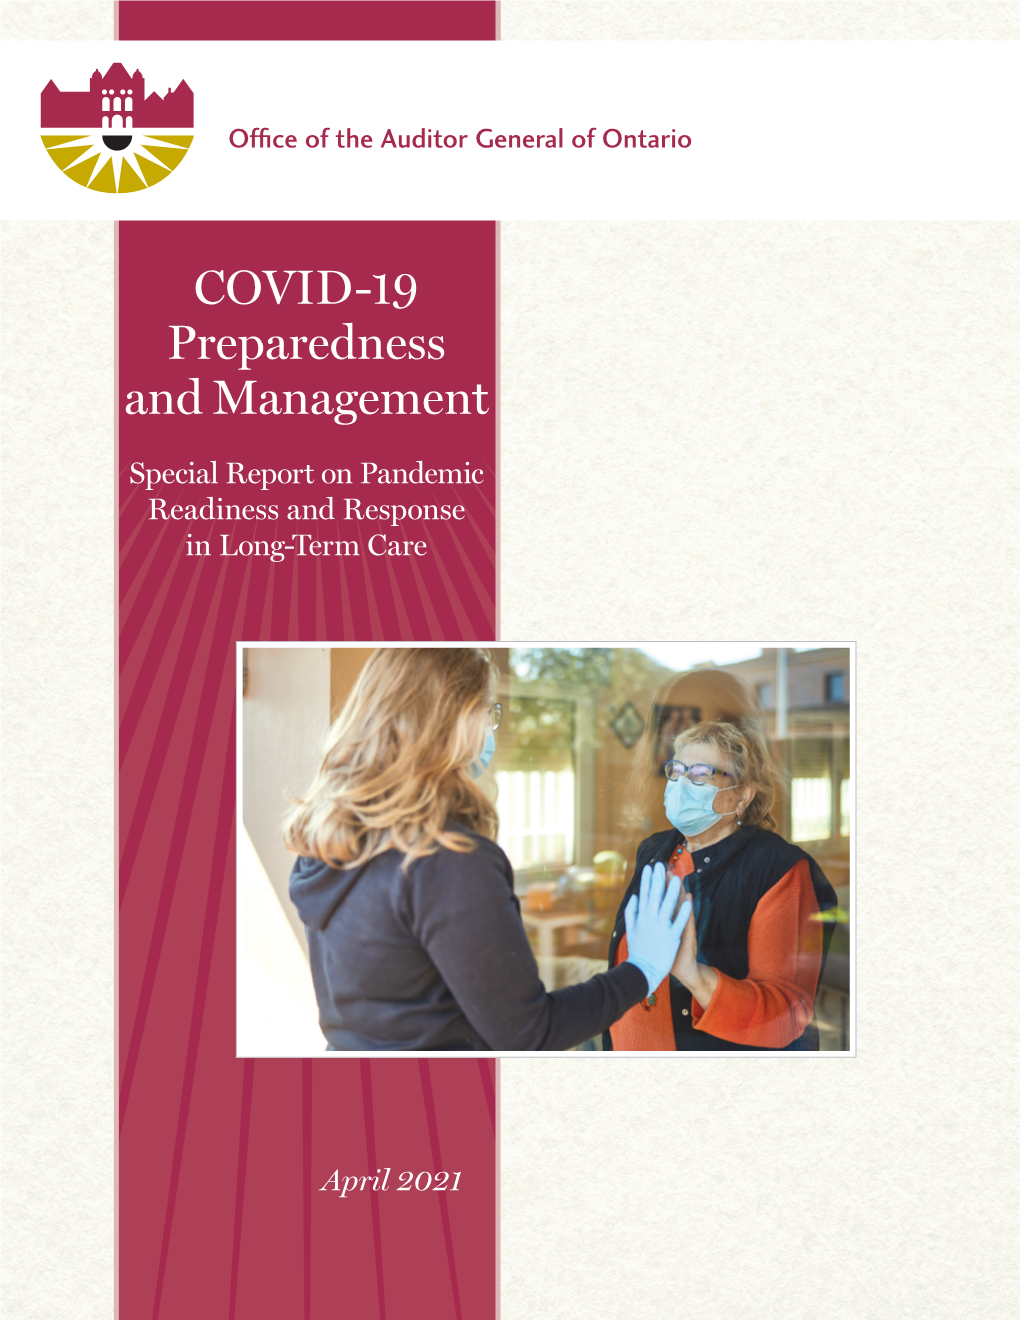 Special Report on Pandemic Readiness and Response in Long-Term Care